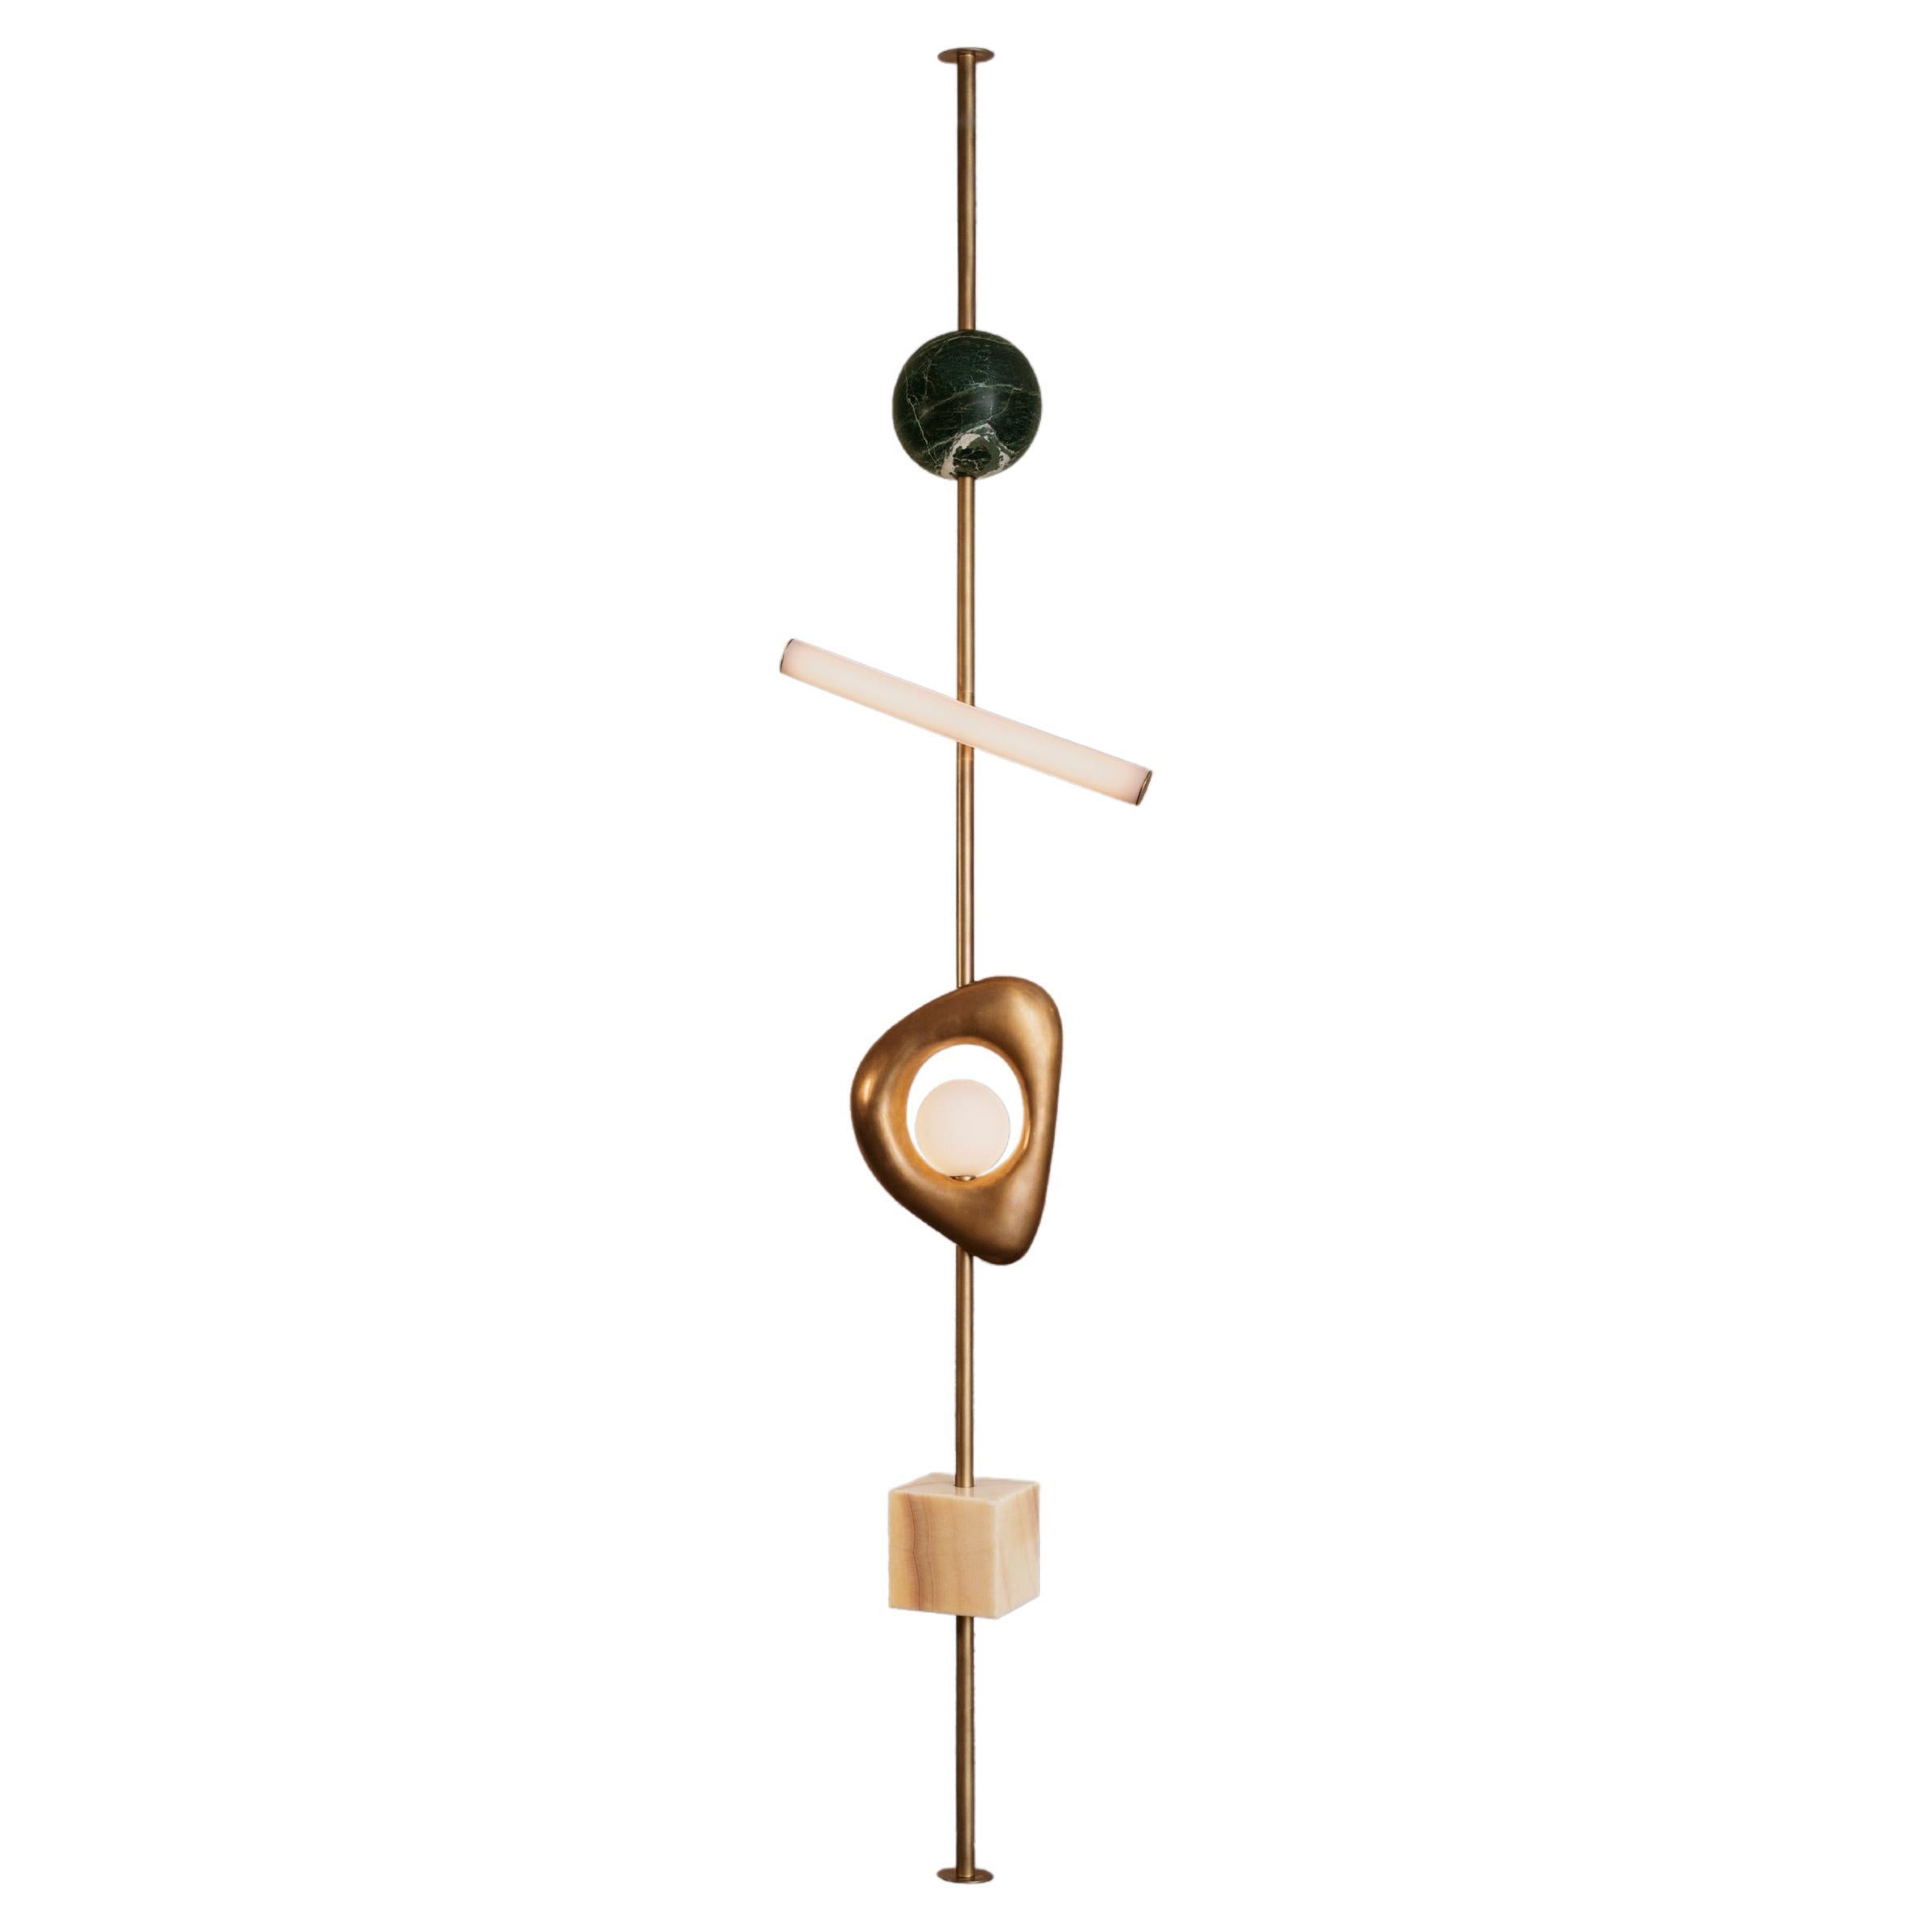 Carved travertine and handblown glass works stretch between floor and ceiling. It is both sculpture and light-giving. The height of each Form is tailored to fit perfectly in any space. Available as a plug-in from top or bottom, please inquire.

This